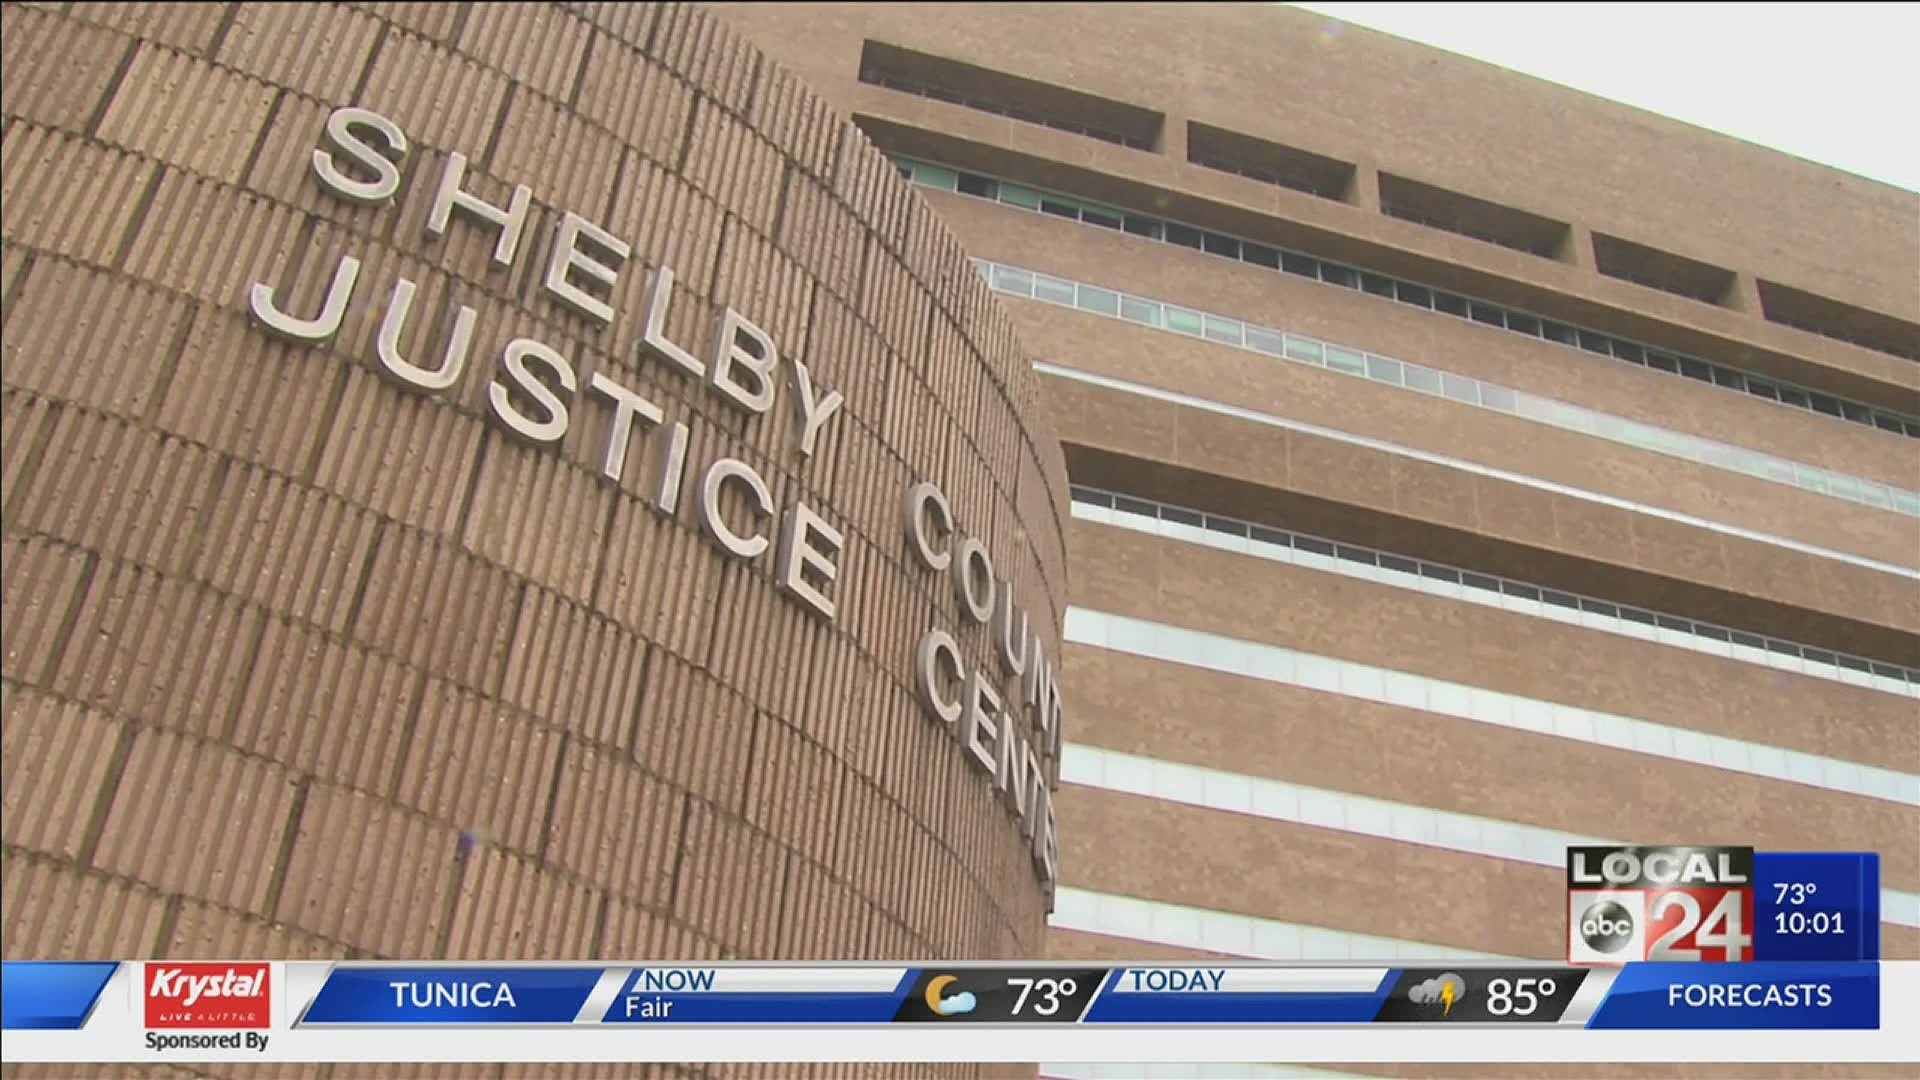 A Shelby County criminal judge suspended all jury trials due to the prevalence of COVID-19 in the county